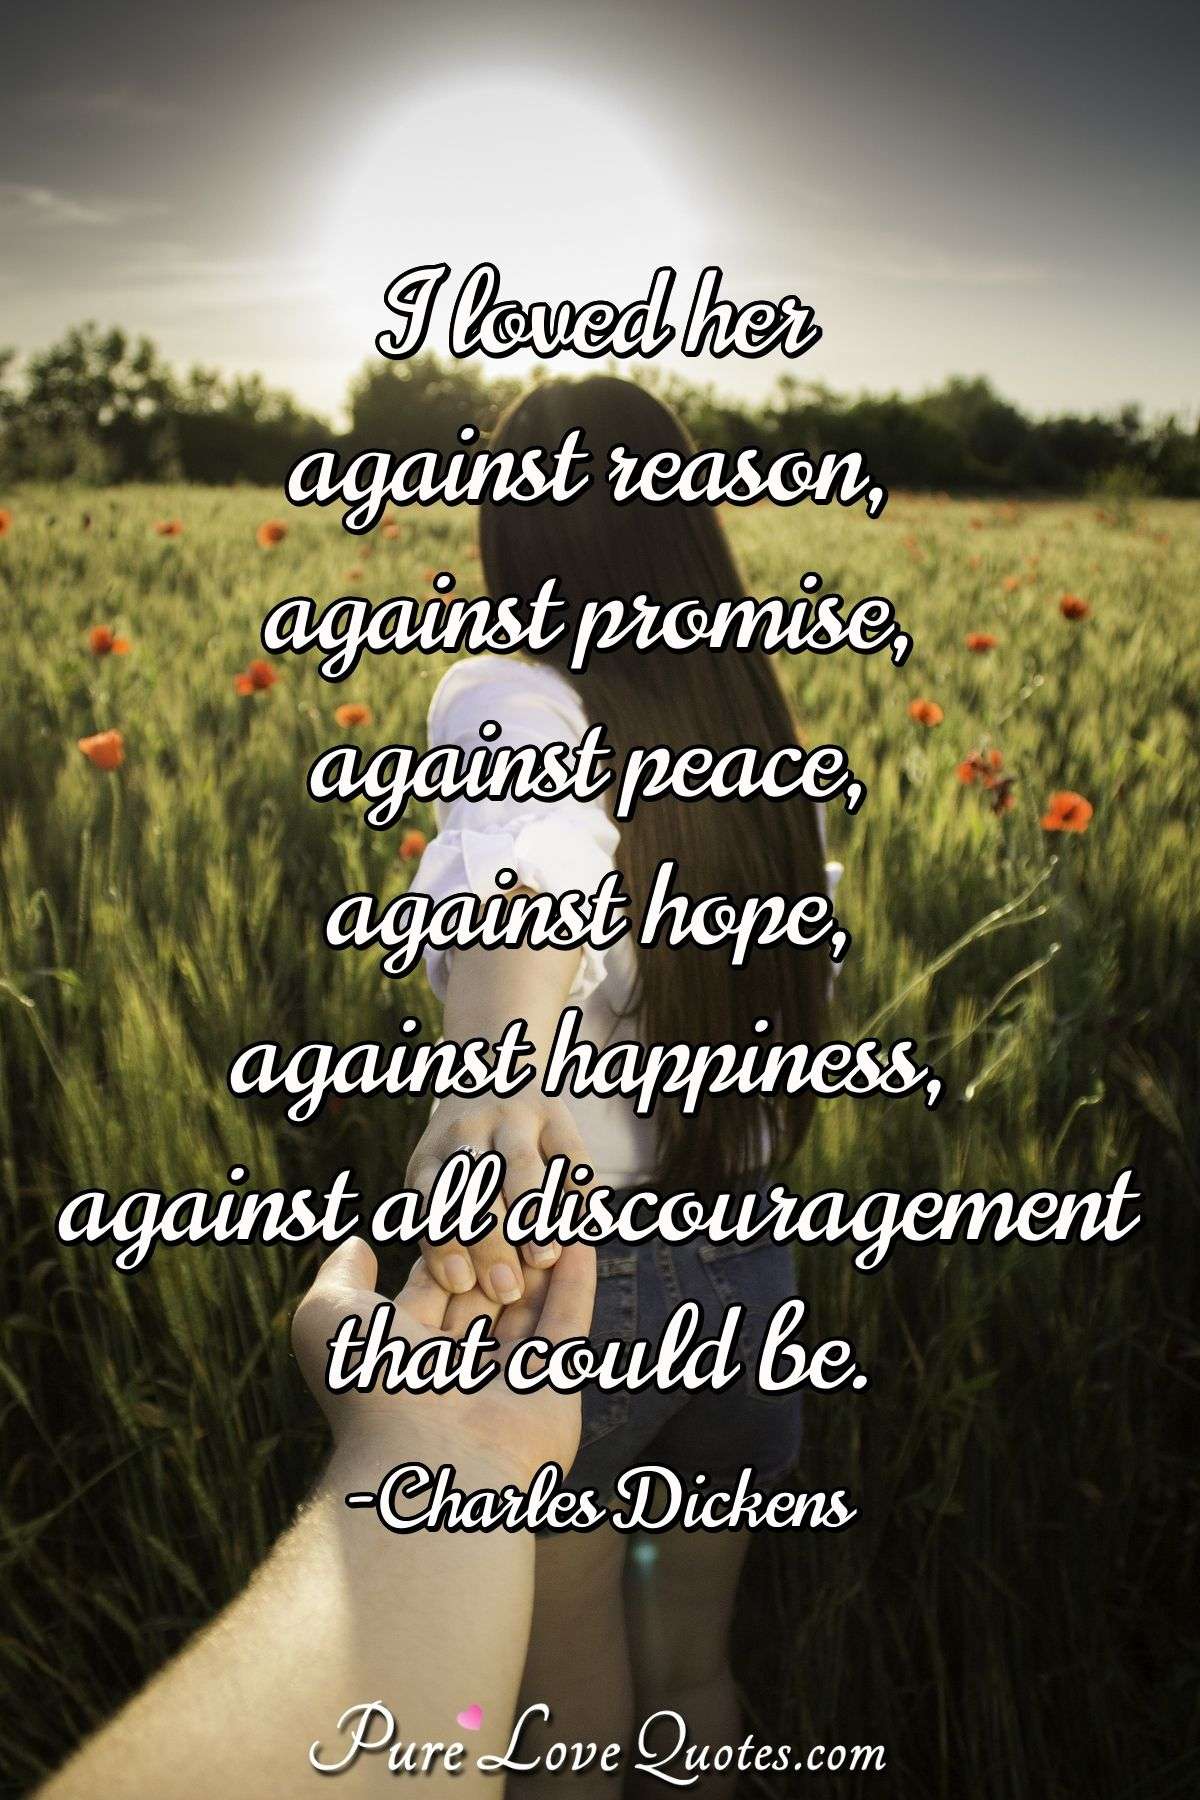 I loved her against reason, against promise, against peace, against hope, against happiness, against all discouragement that could be. - Charles Dickens